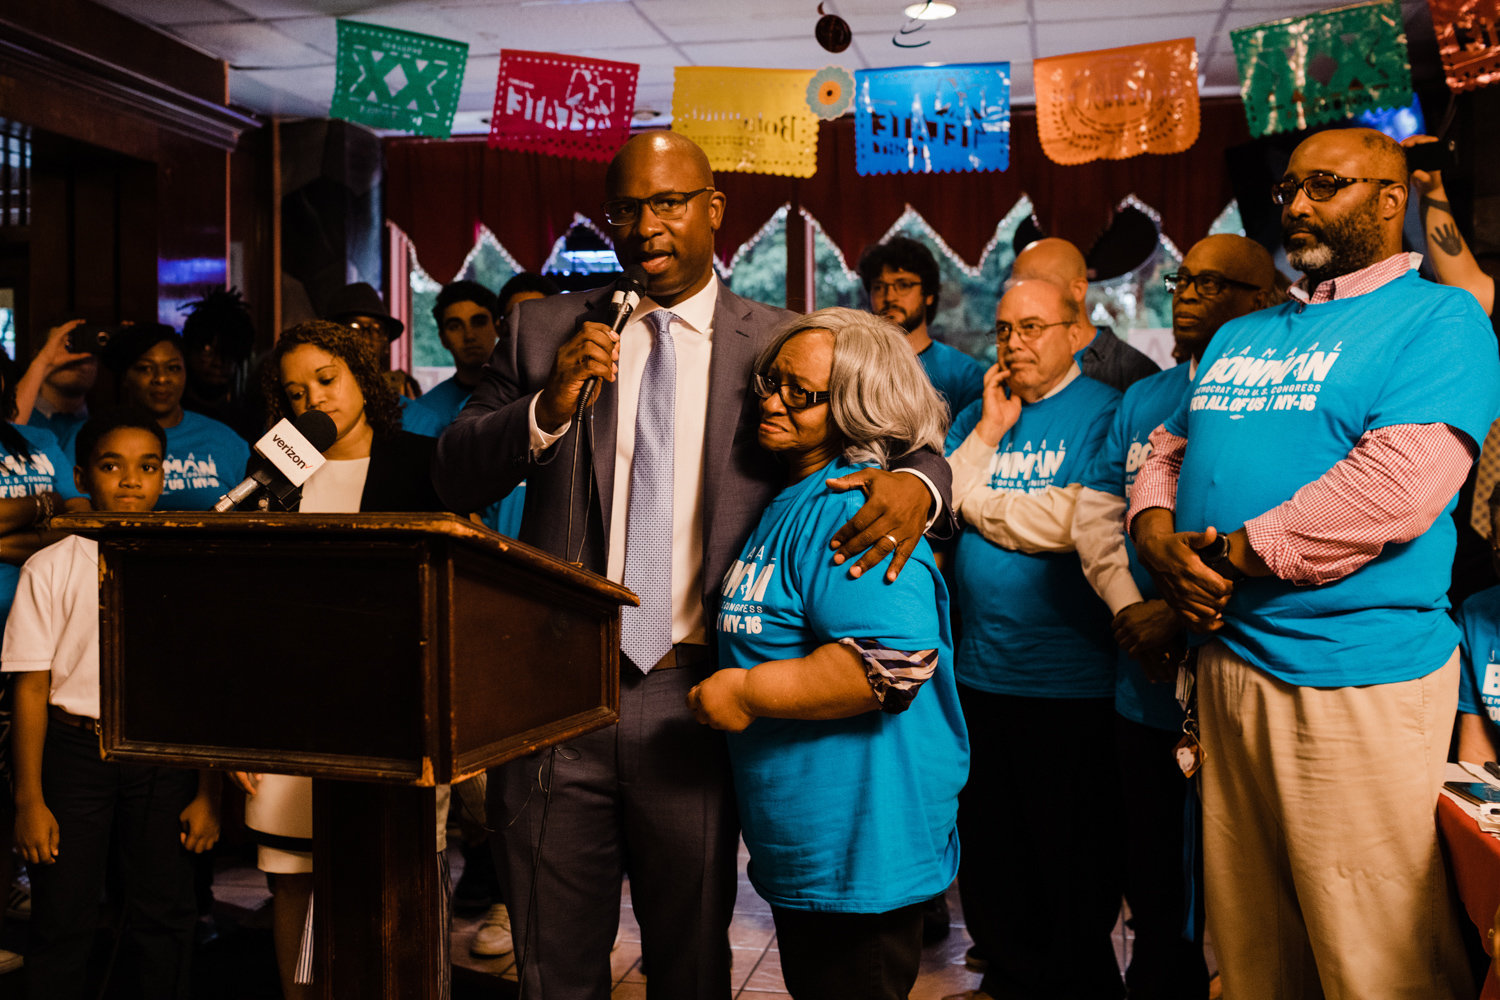 Jamaal Bowman has called for a one-on-one debate with U.S. Rep. eliot engel, whom he is hoping to unseat in the June Democratic primary. The debate demand.did not include fellow challenger Andom ghebreghiorgis.